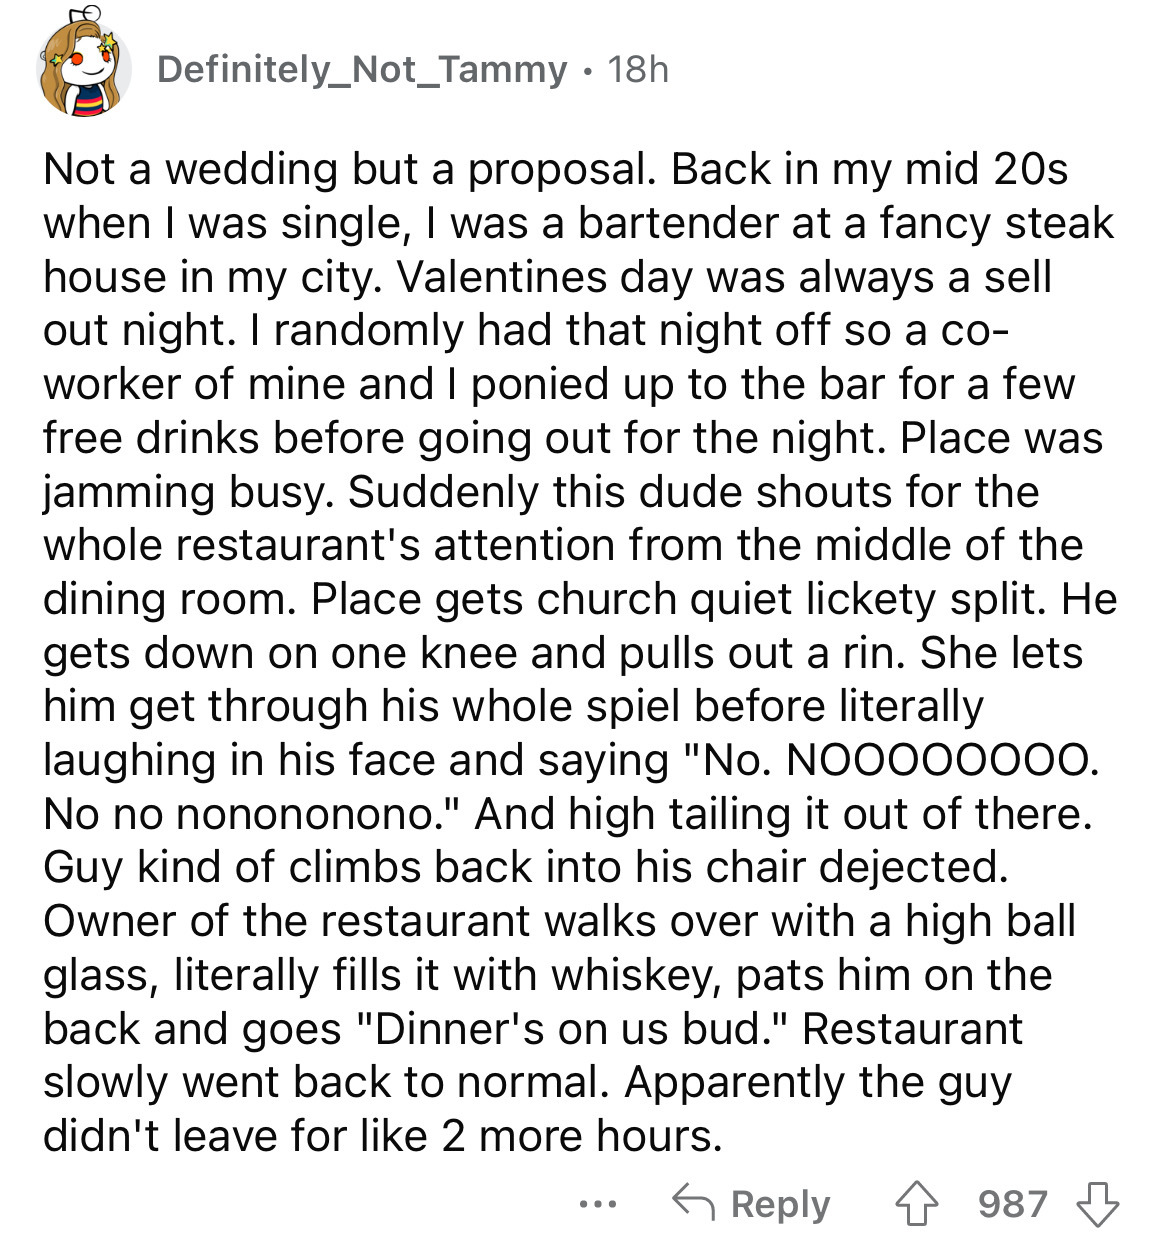 document - Definitely_Not_Tammy 18h Not a wedding but a proposal. Back in my mid 20s when I was single, I was a bartender at a fancy steak house in my city. Valentines day was always a sell out night. I randomly had that night off so a co worker of mine a